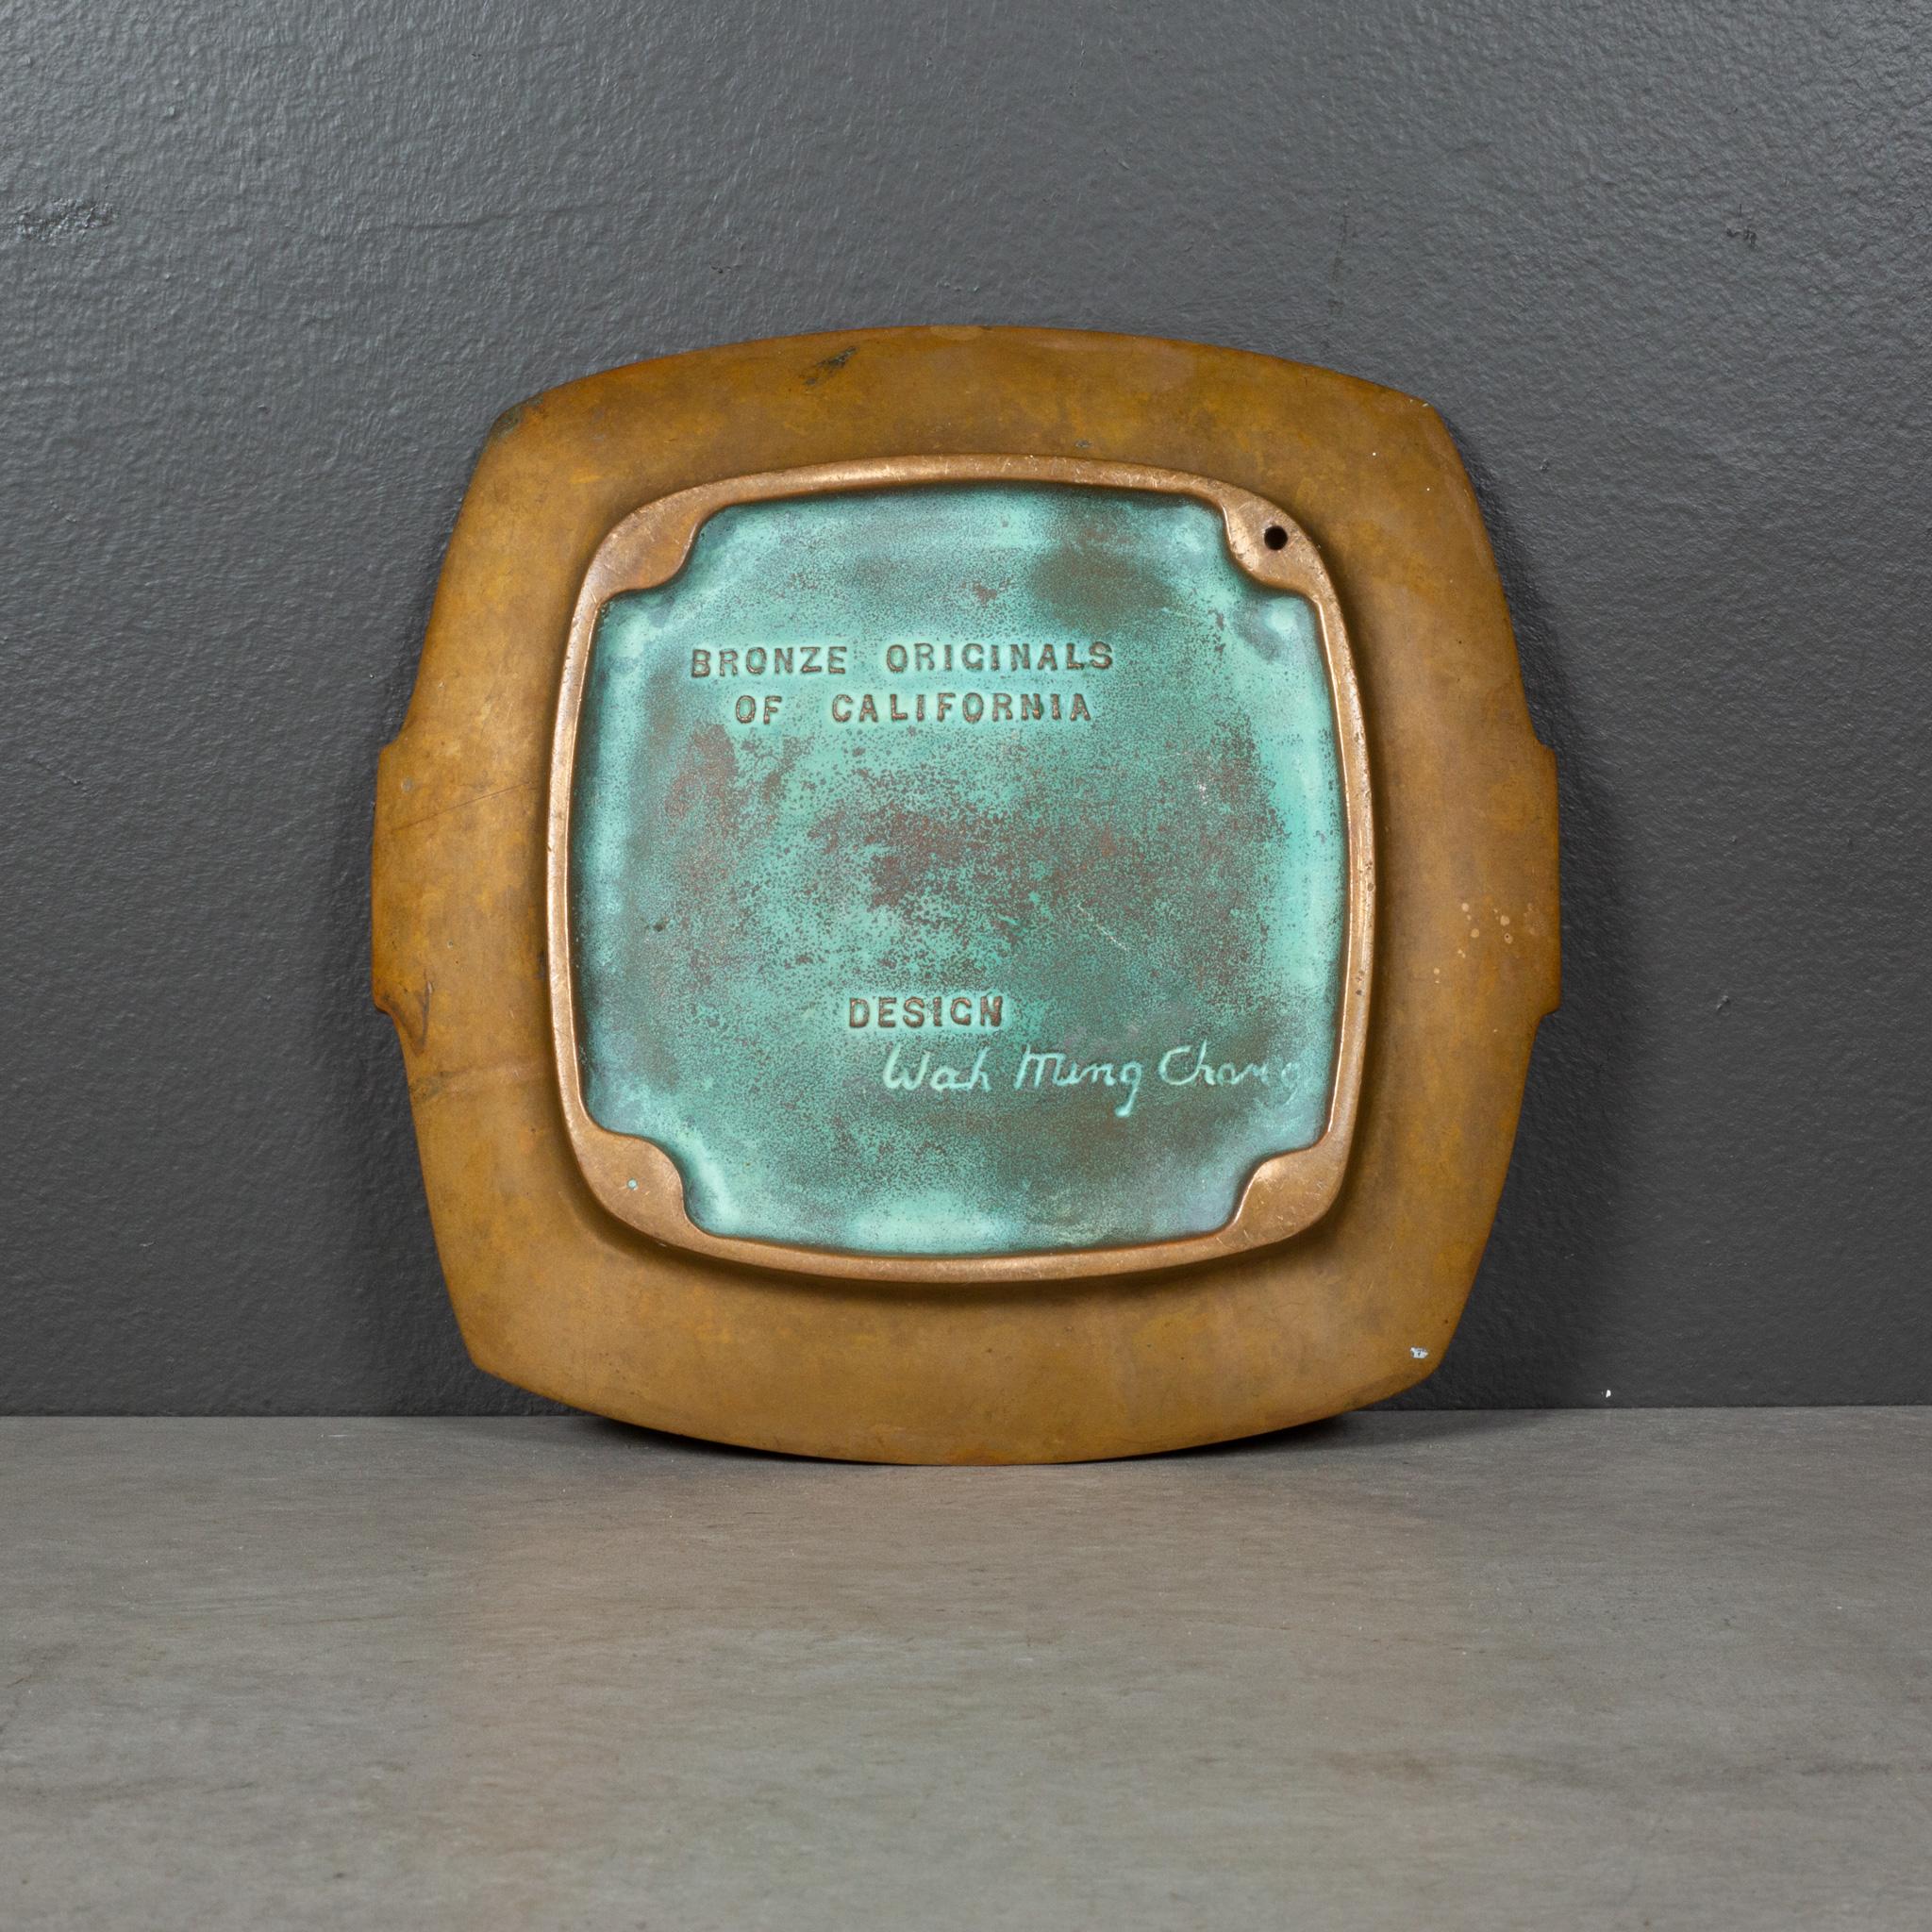 ABOUT

An impressive, heavy solid bronze mid-century ashtray designed by California artist and sculptor Wah Ming Chang. Known later in life for his sculptures and the props he designed for Stars Trek, The Original Series.

Stamped “Bronze Originals